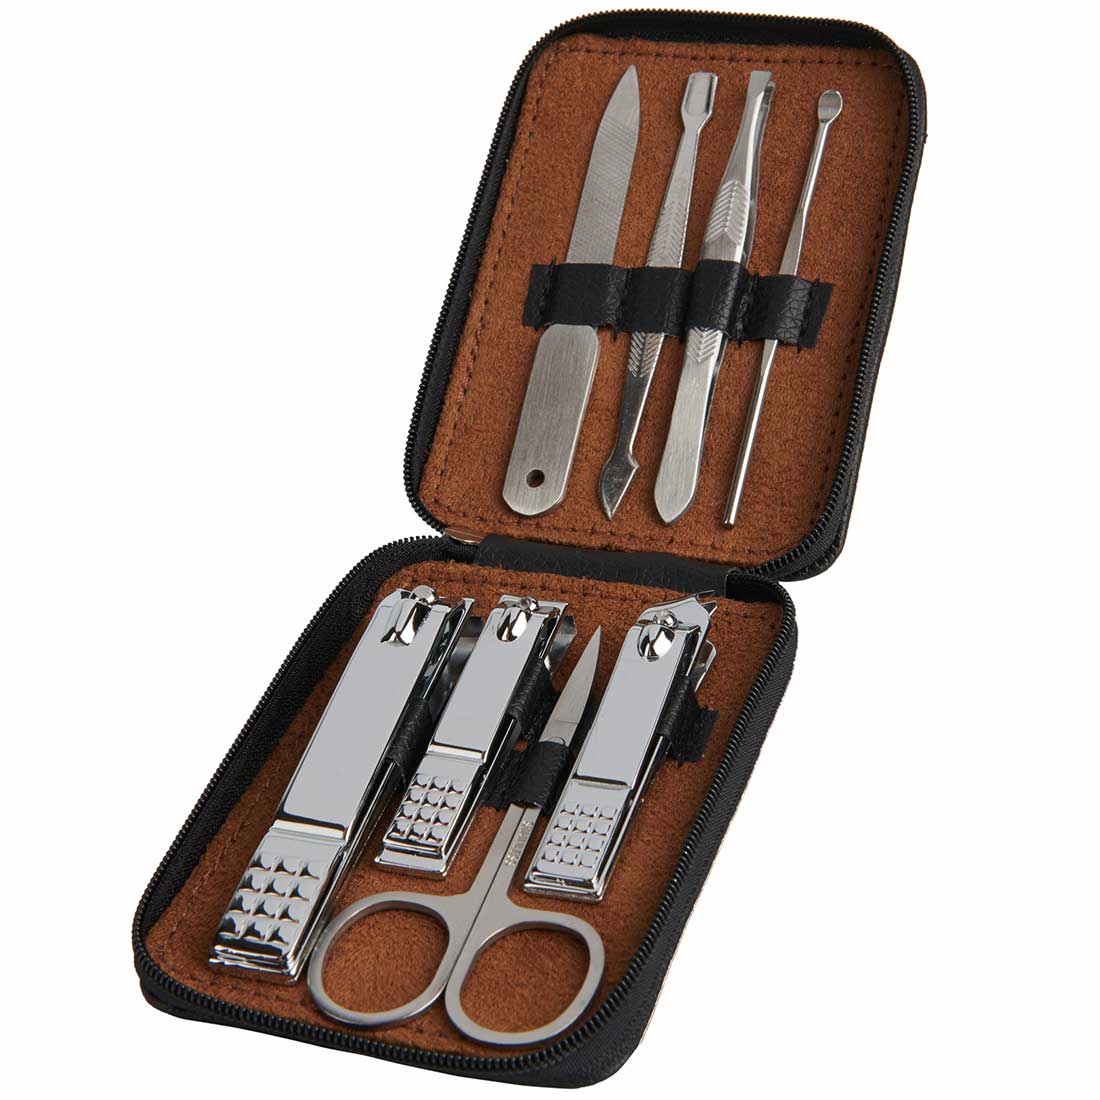 Manicure Kit by Skull Shaver consisting of 8 essential tools in a convenient travel case. 